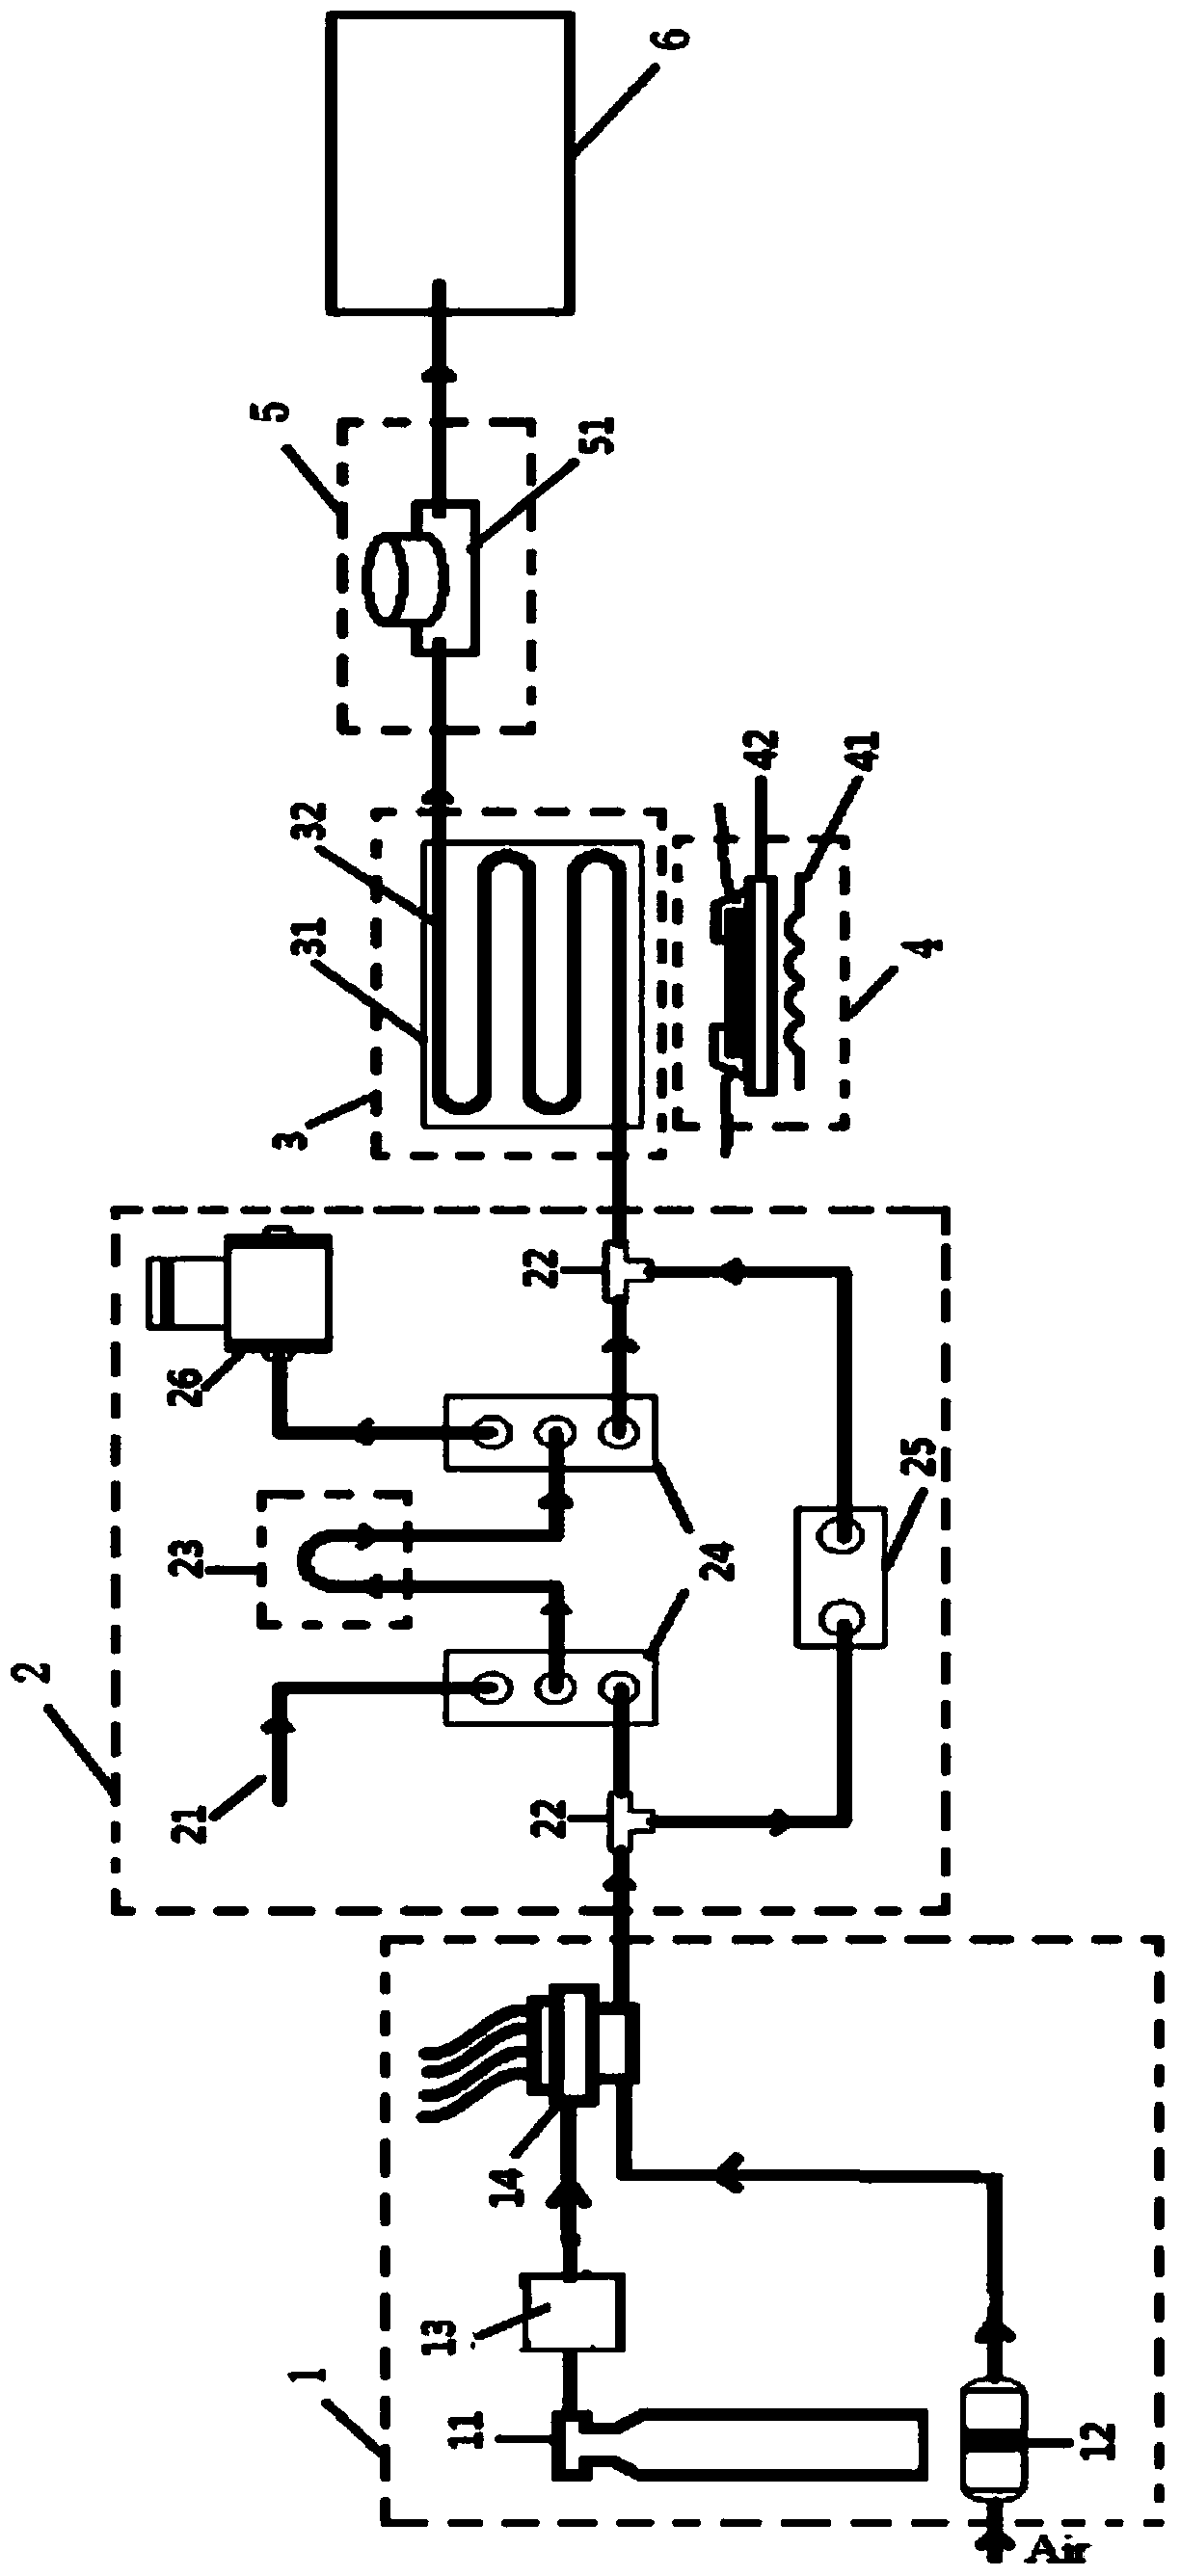 Foul gas detection device based on micro-fluidic chip